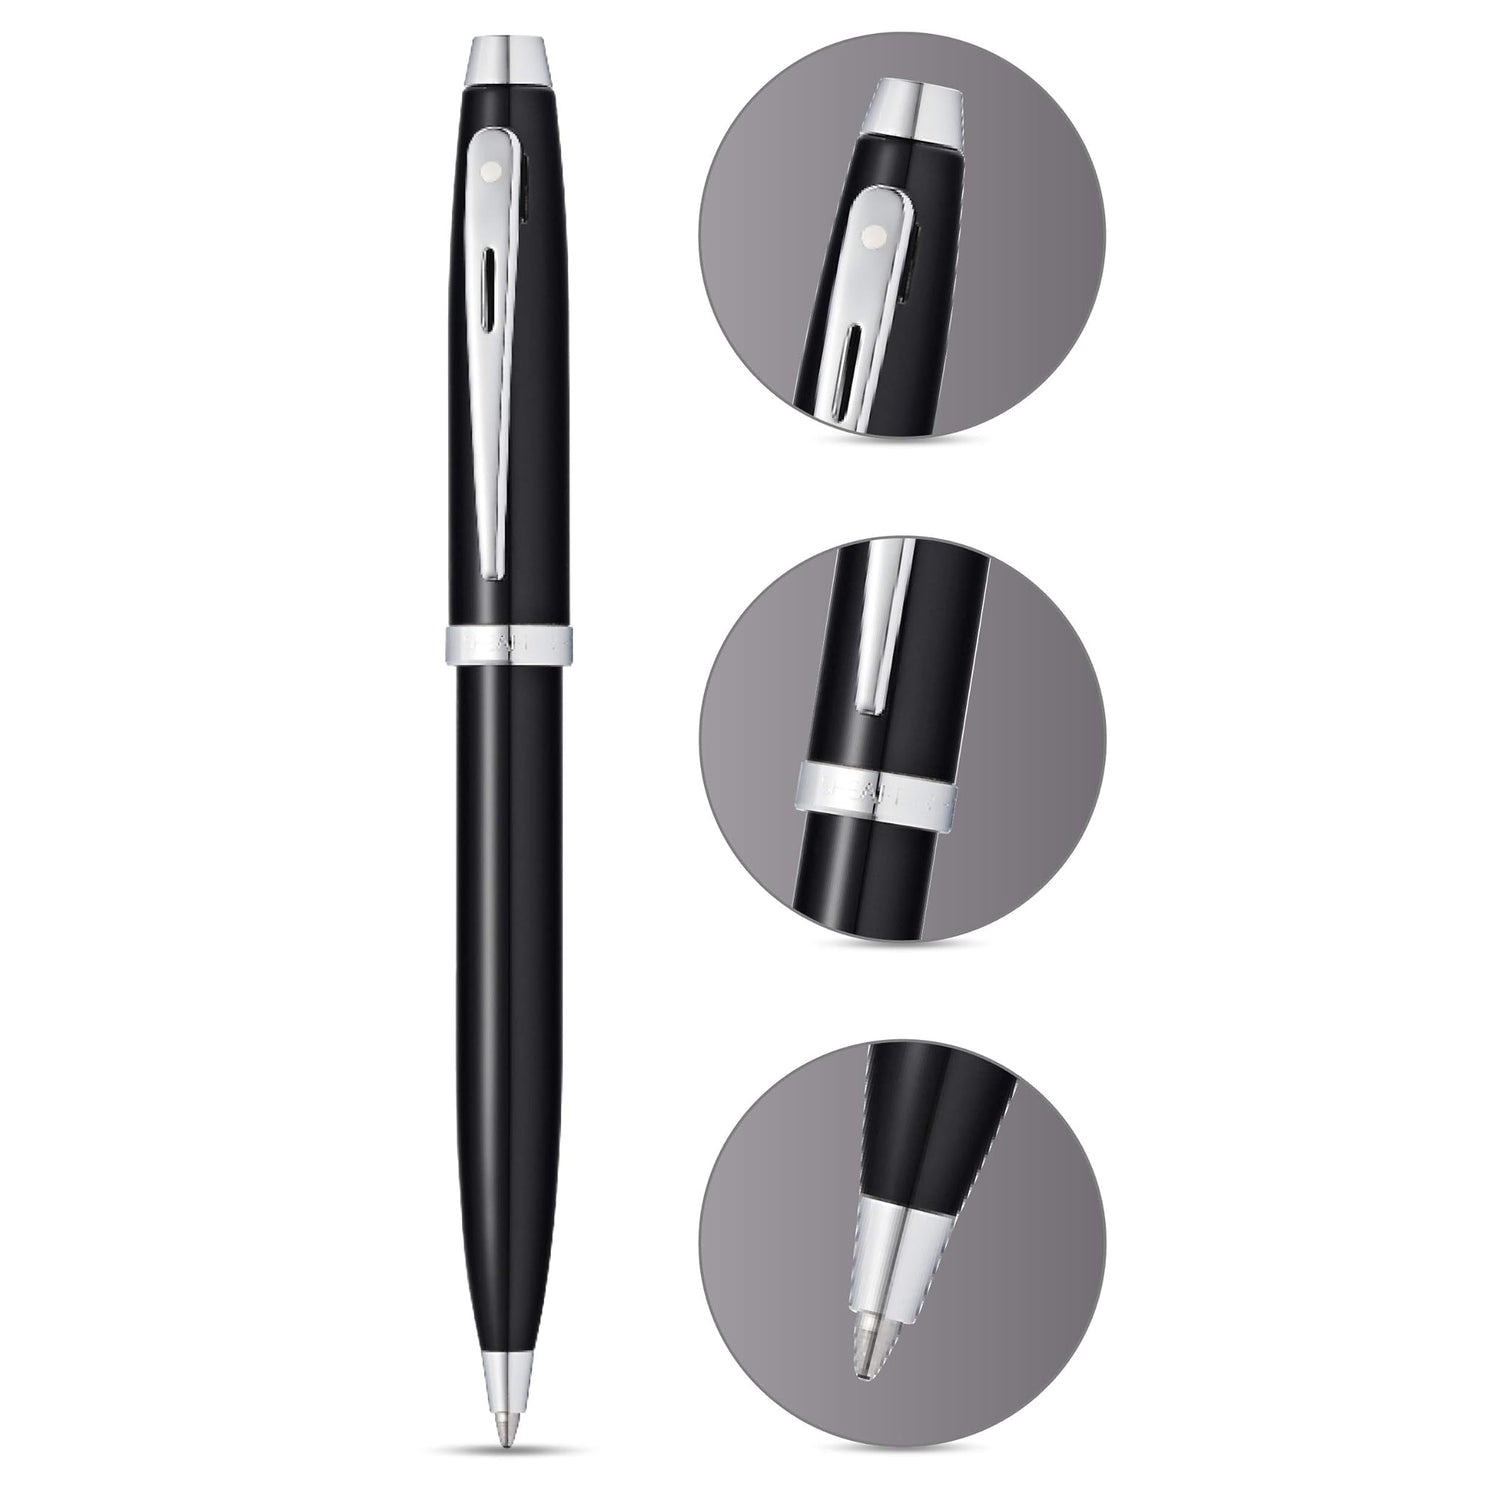 WP23896-PEN SHEAFFER GIFT 100 A 9338 - GLOSSY BLACK LACQUER WITH CHROME PLATE TRIM BP